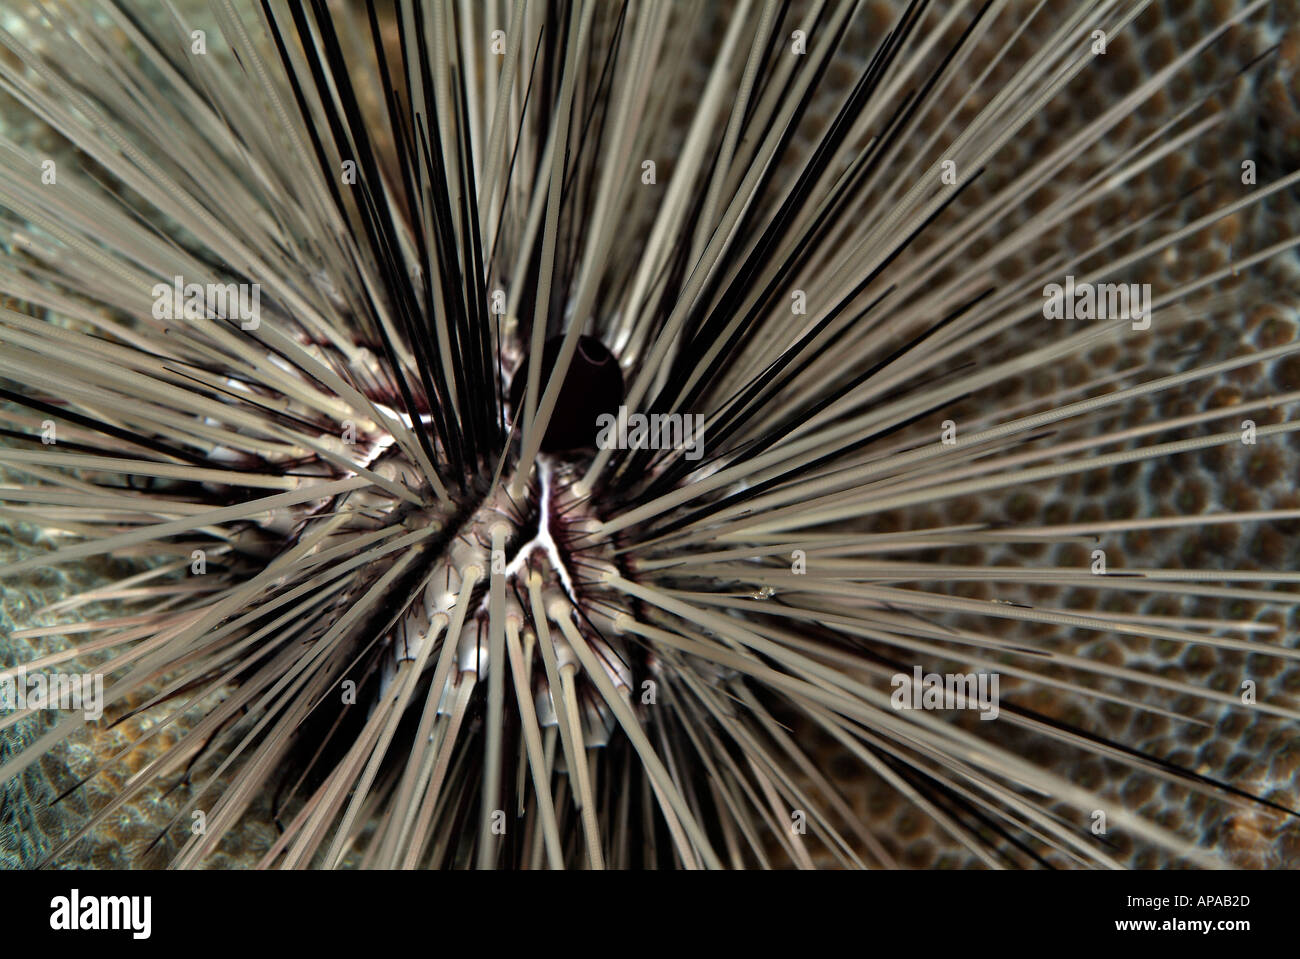 Long-spined urchin in the Gulf of Mexico, off Texas Stock Photo